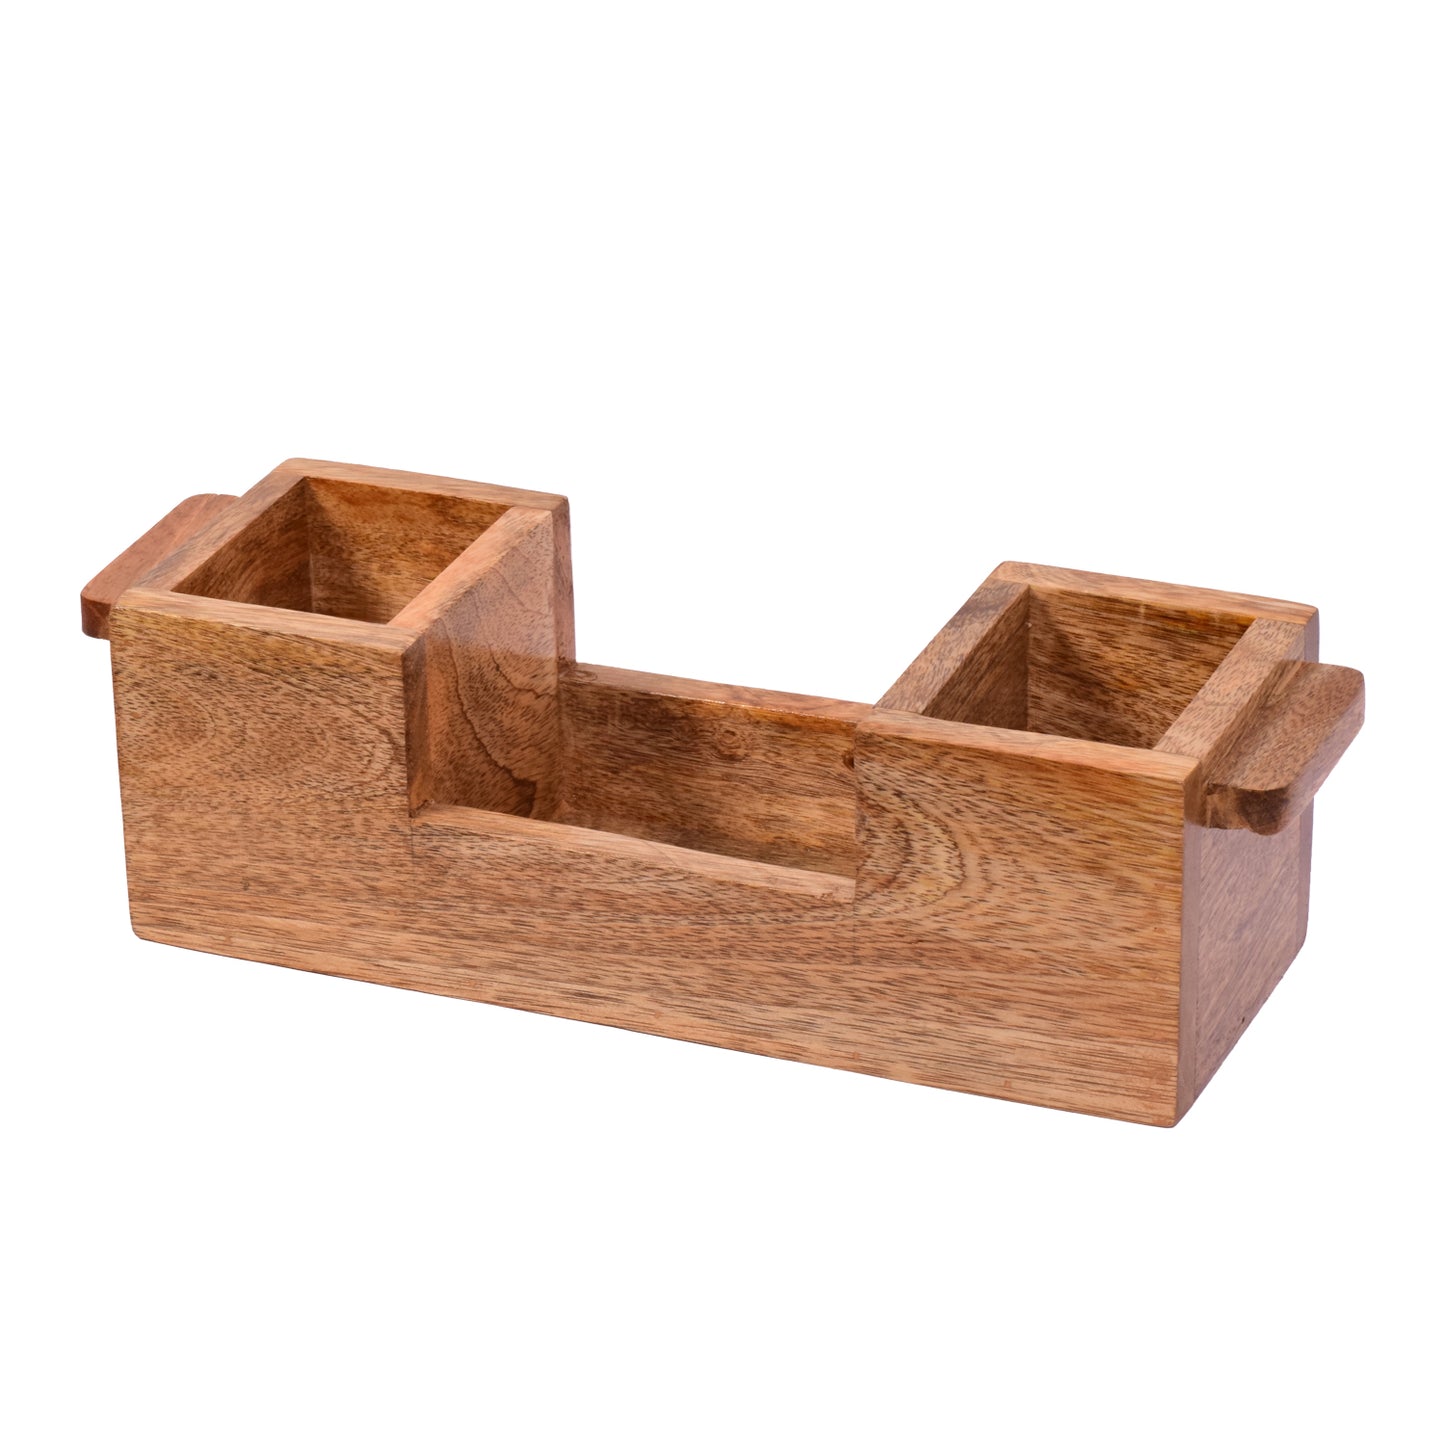 The Weaver's Nest Wooden Cutlery Holder with Salt & Pepper Shakers and Figurine for Kitchen, Dining Table, Restaurants (34 x 11 x 10 cm)